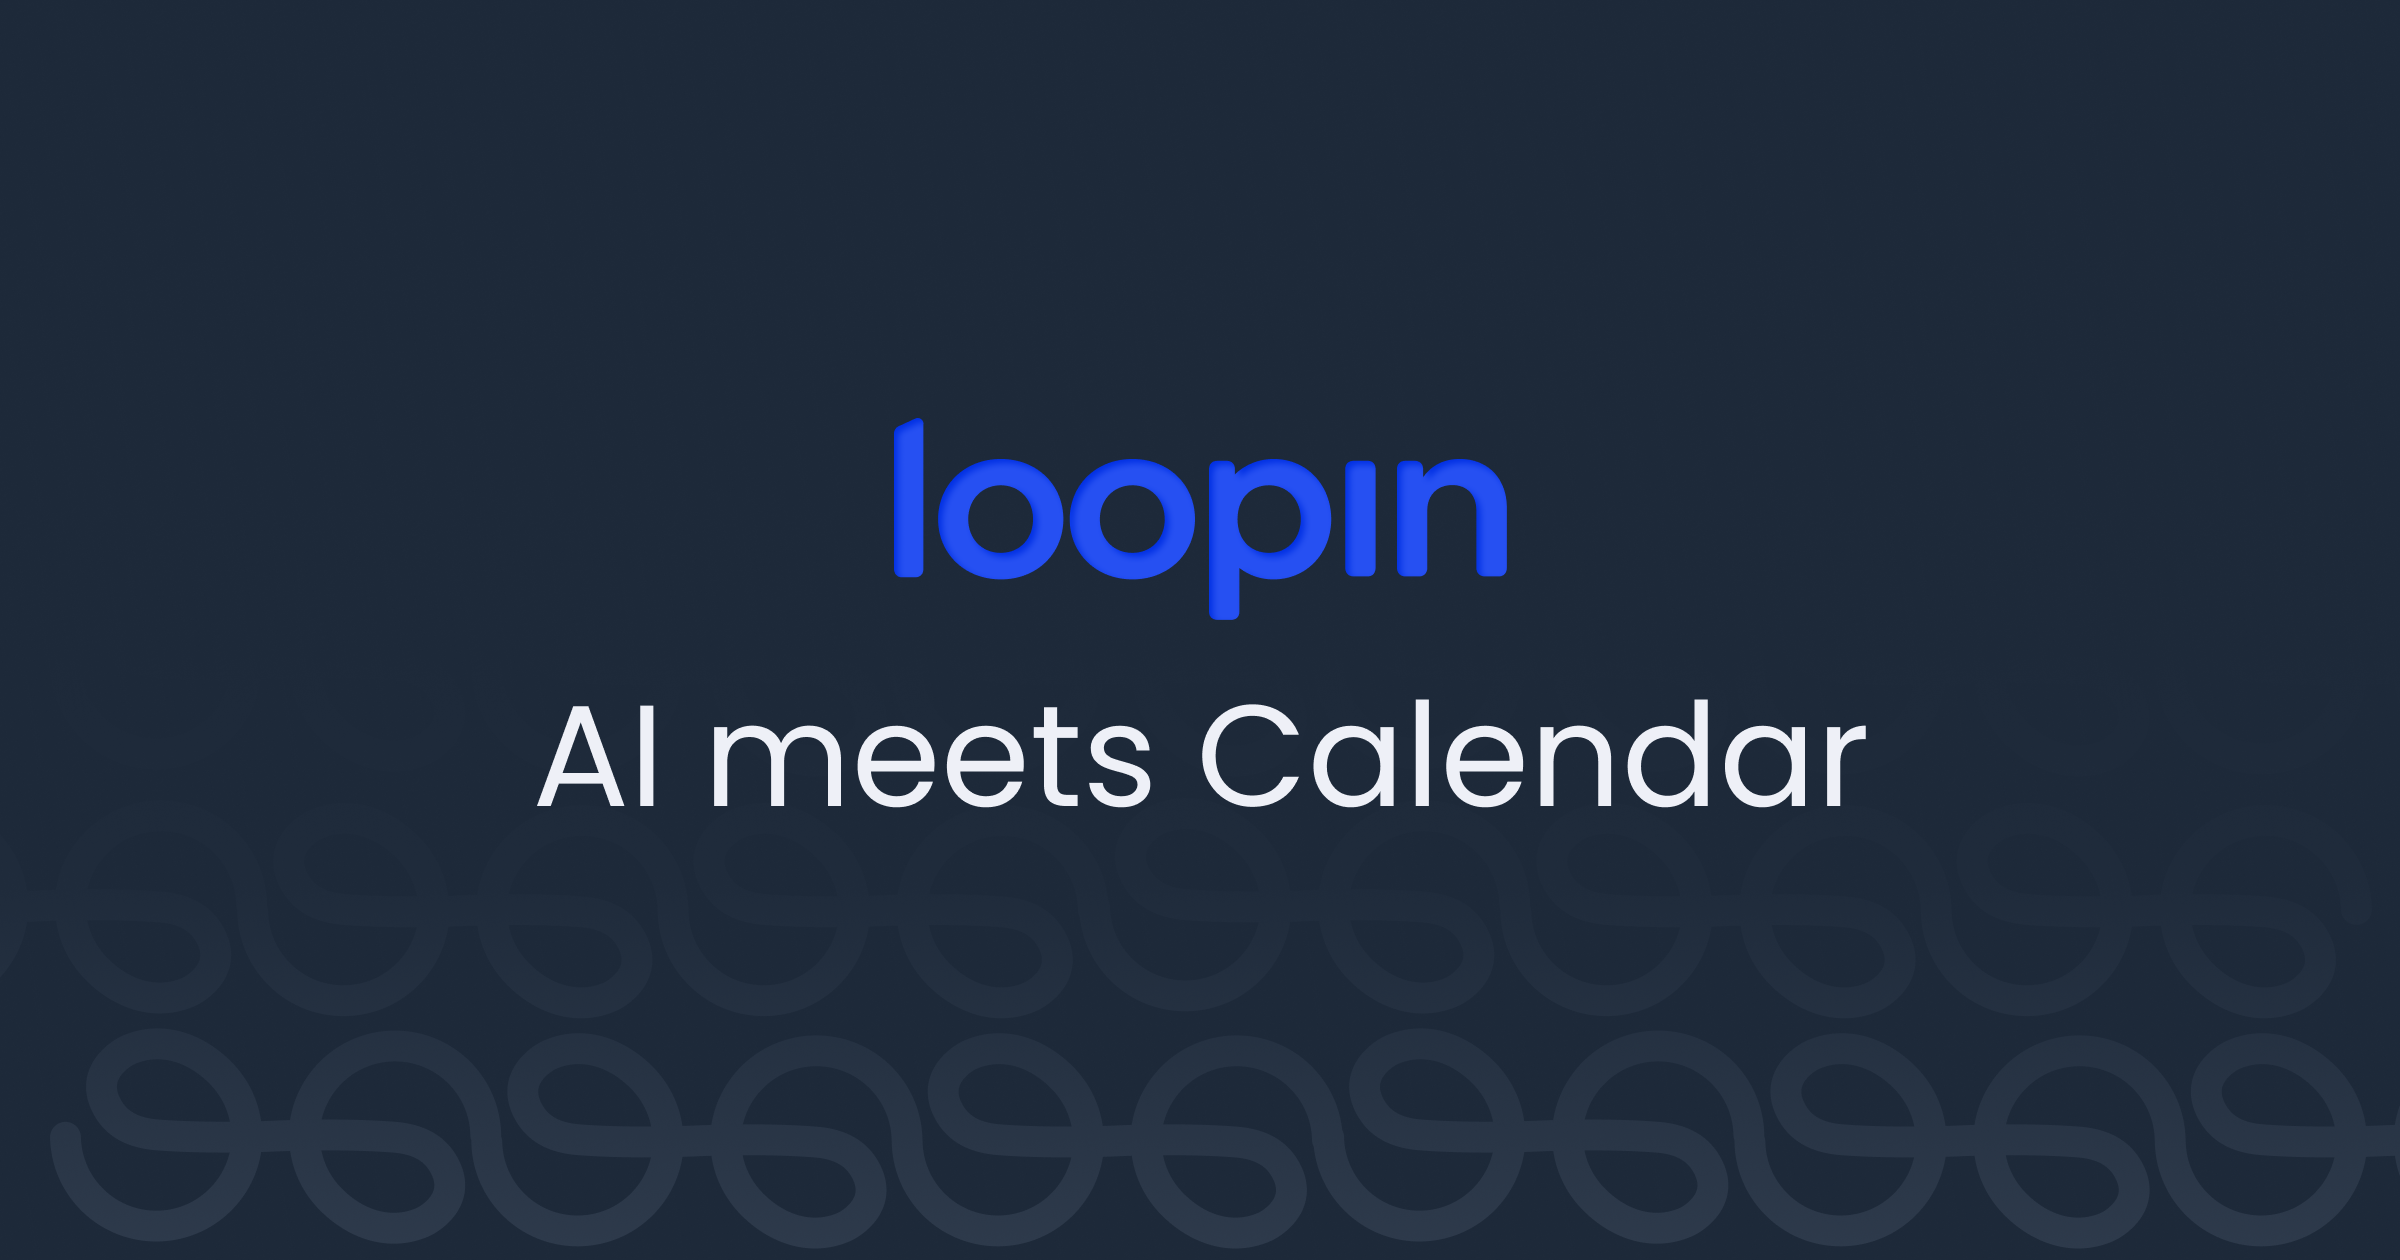 Loopin AI - A platform for meetings, event planning and calendar management